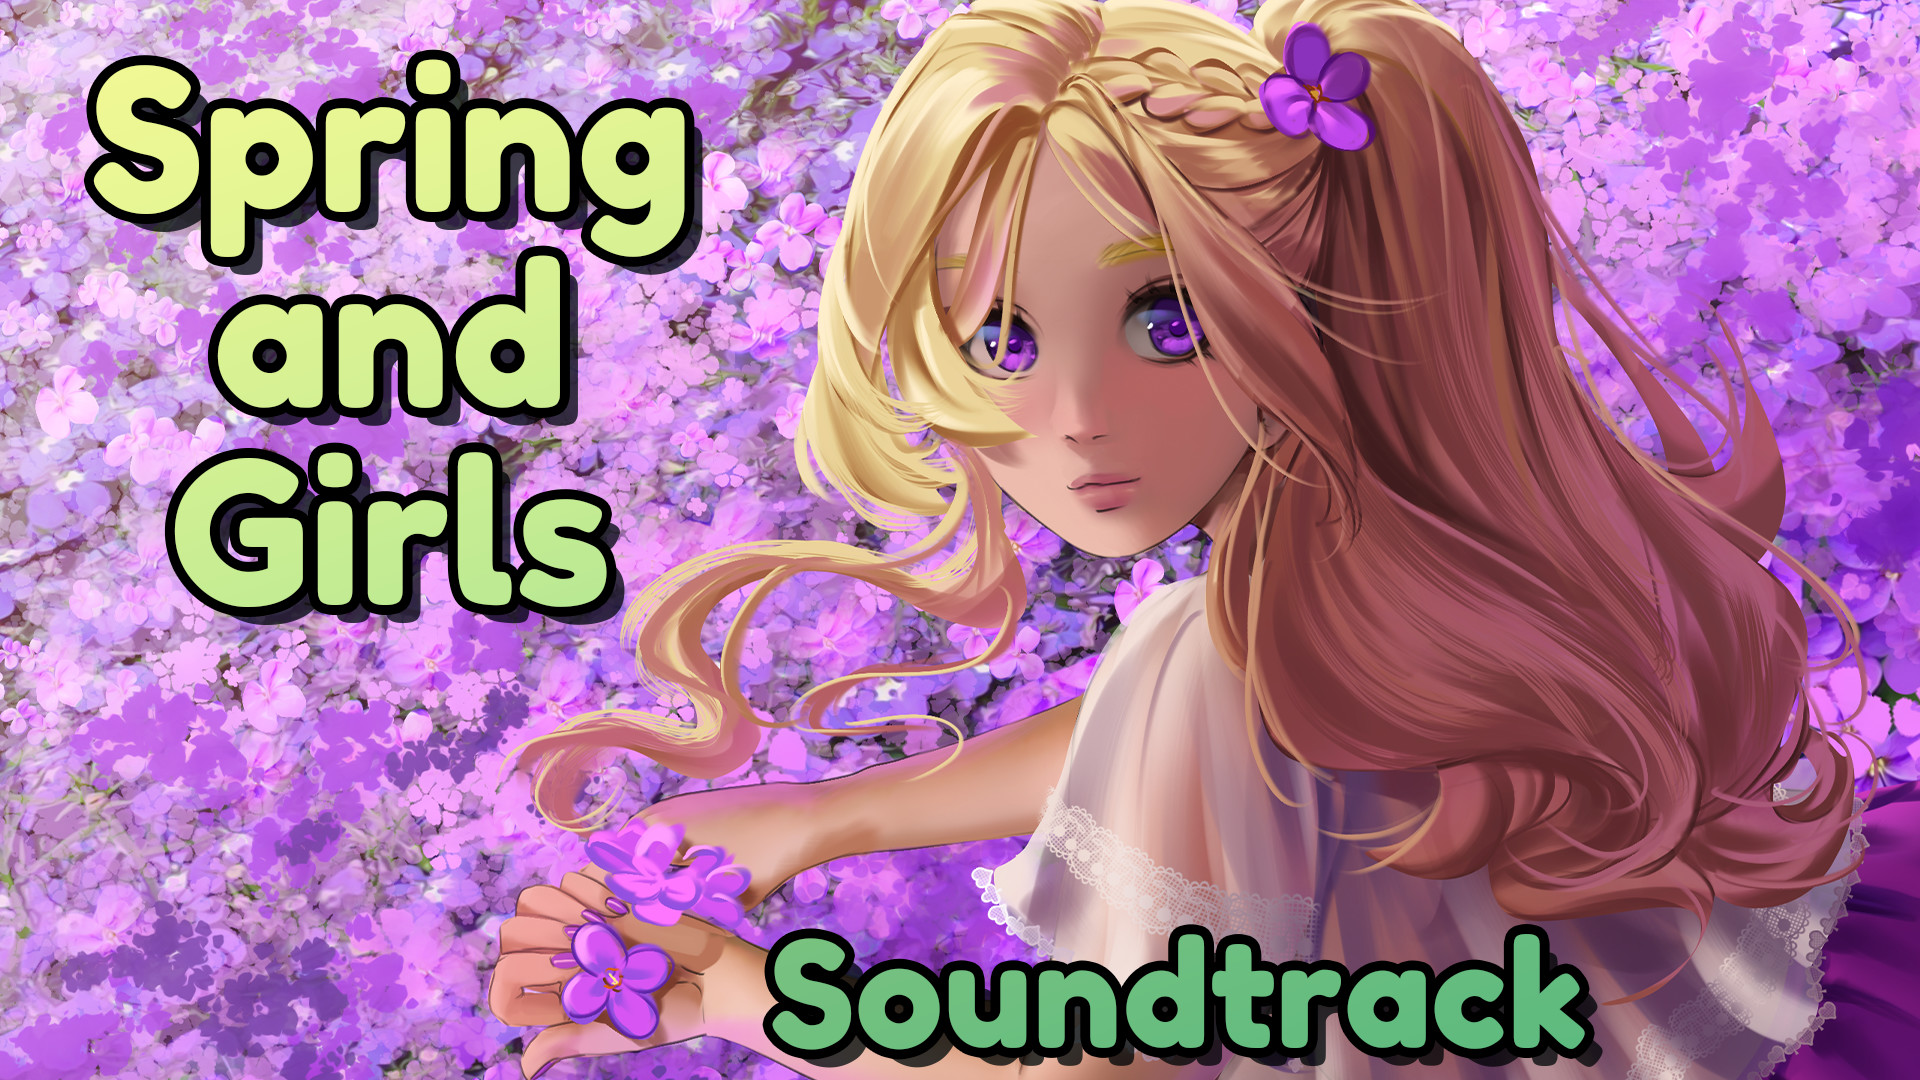 Spring and Girls Soundtrack Featured Screenshot #1